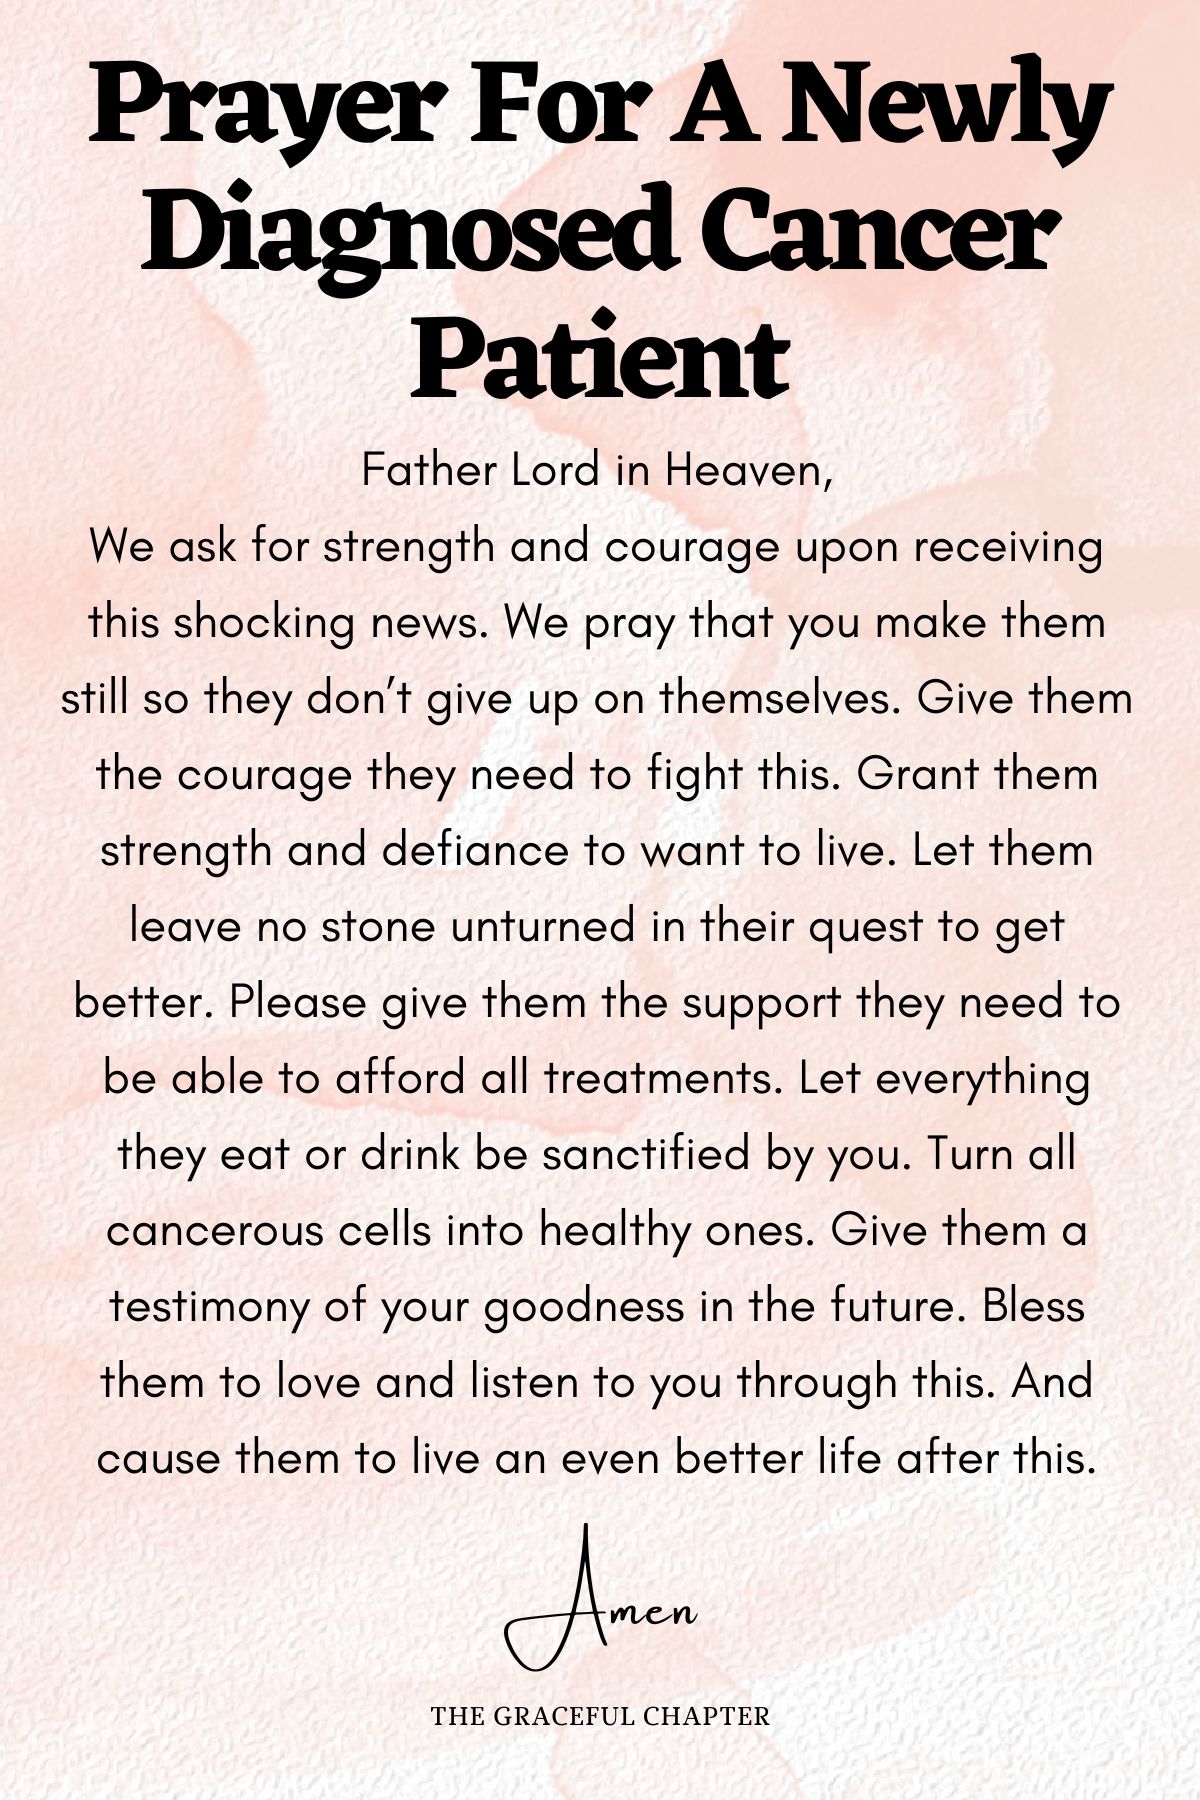 Prayer For A Newly Diagnosed Cancer Patient